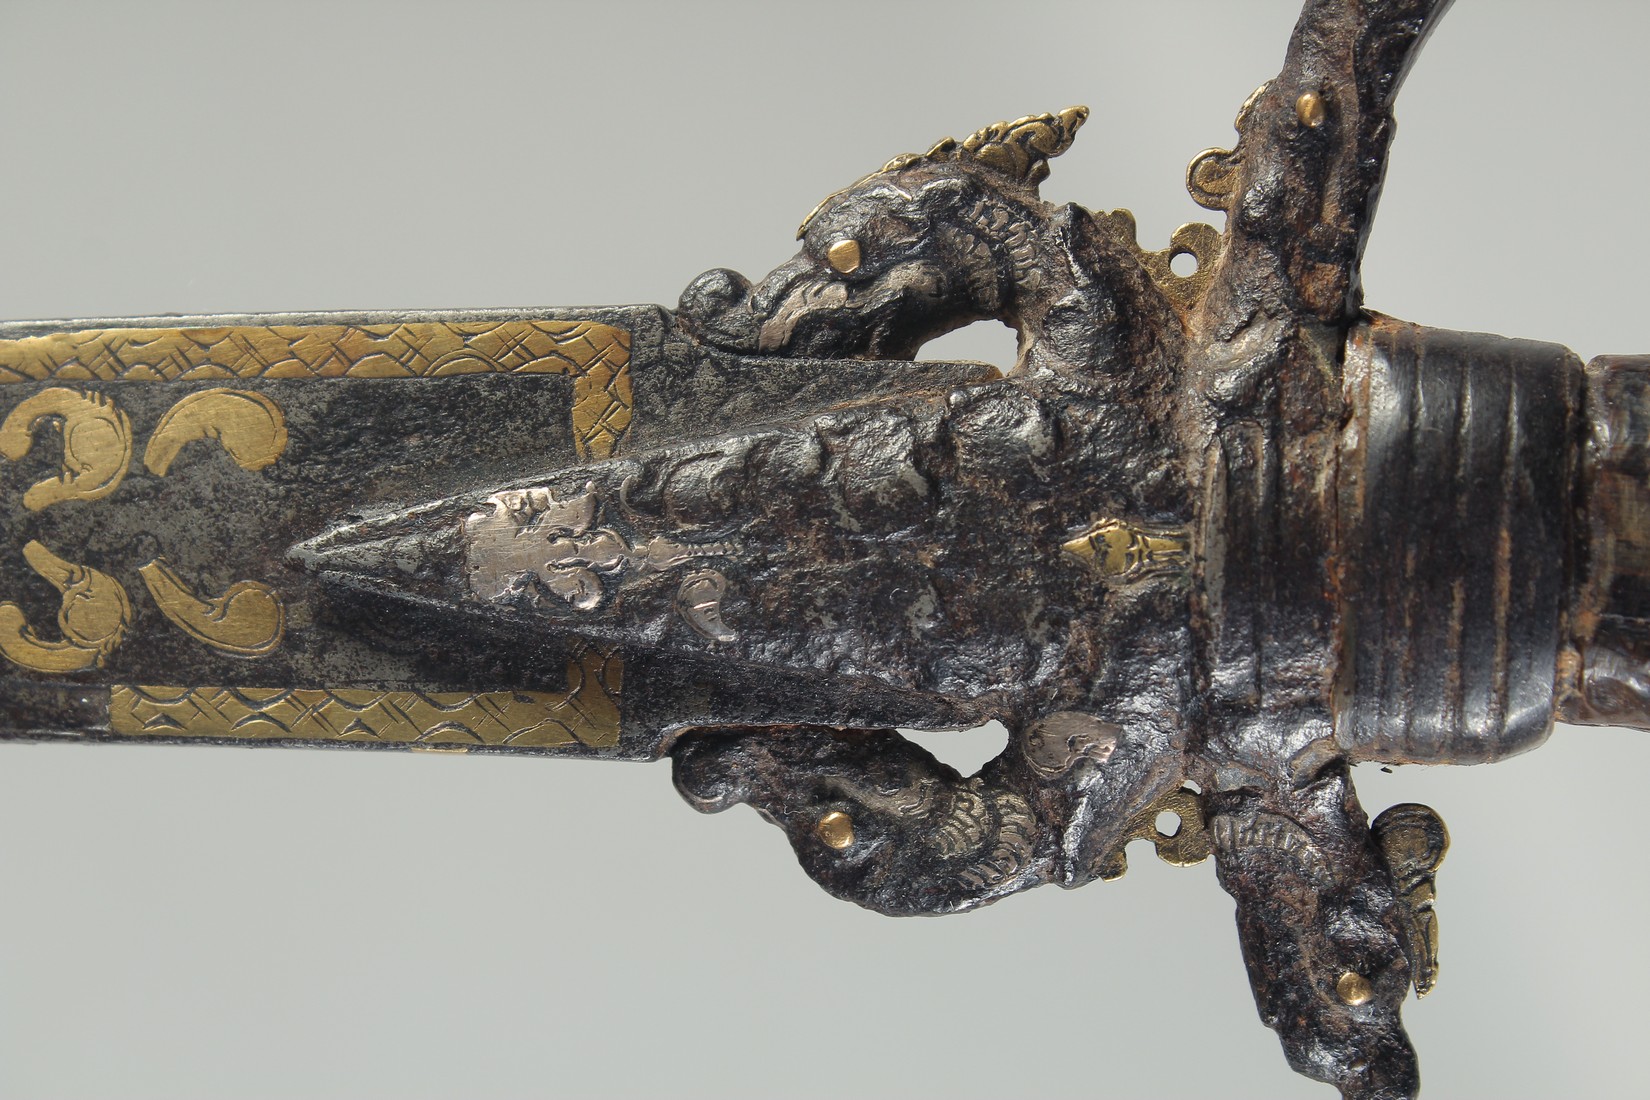 A RARE 17TH CENTURY CEYLONESE SRI LANKAN KASTANE SWORD, with carved silver mounted rhino horn handle - Image 3 of 8